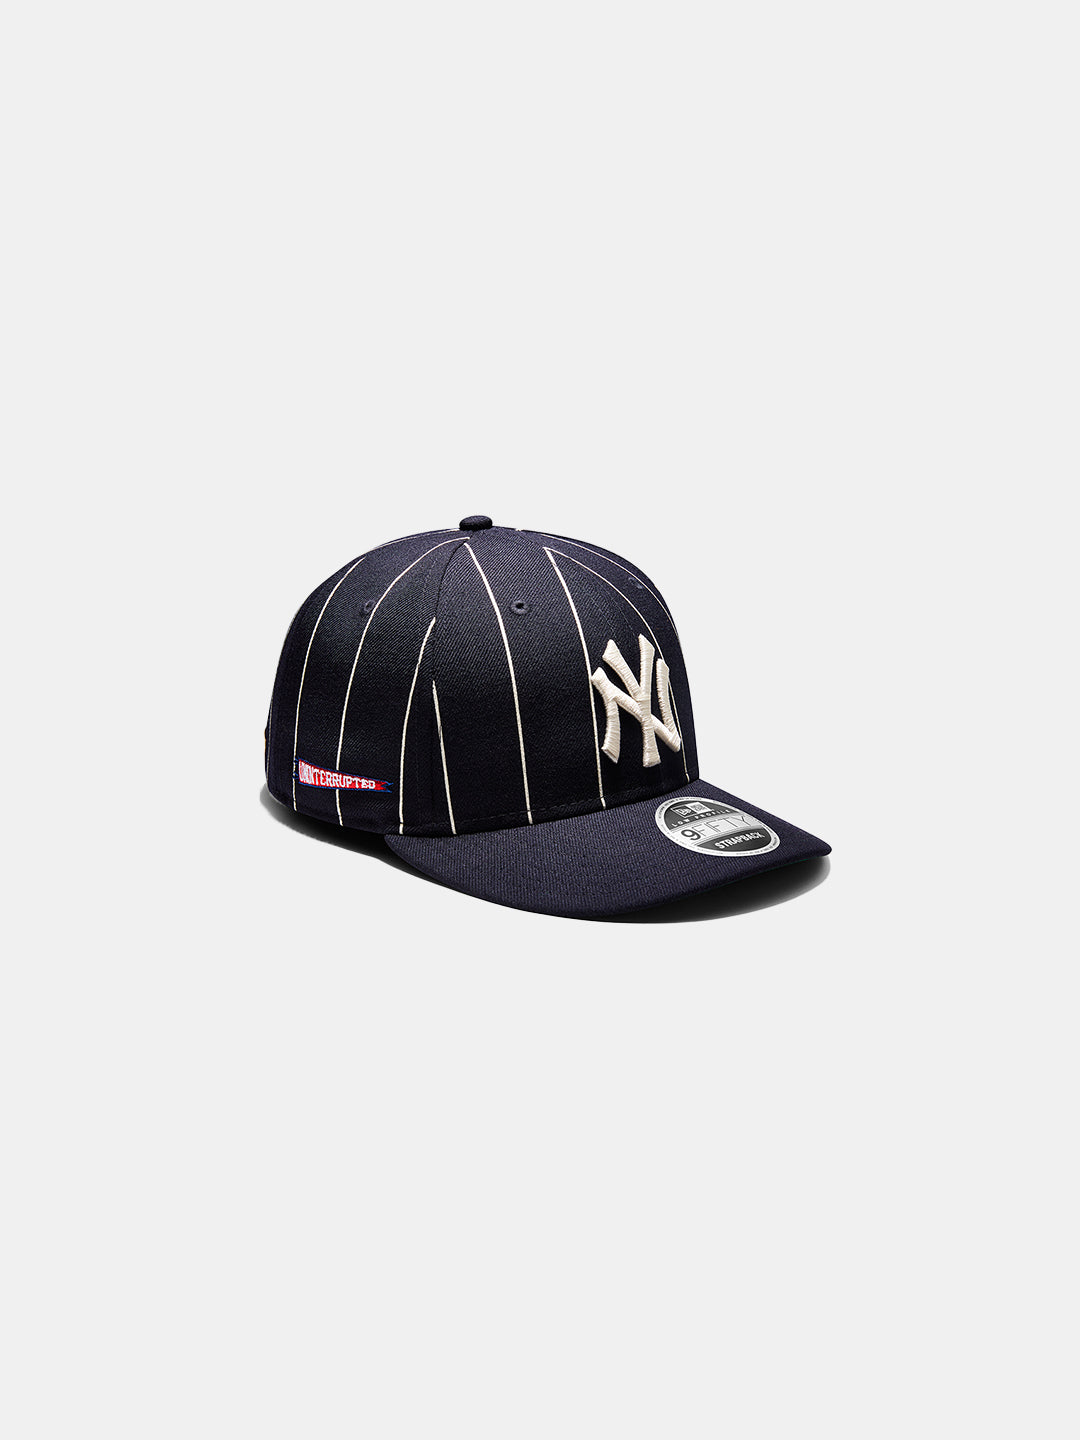 NY Yankees X UNINTERRUPTED Low Profile 9FIFTY - blue and white striped hat